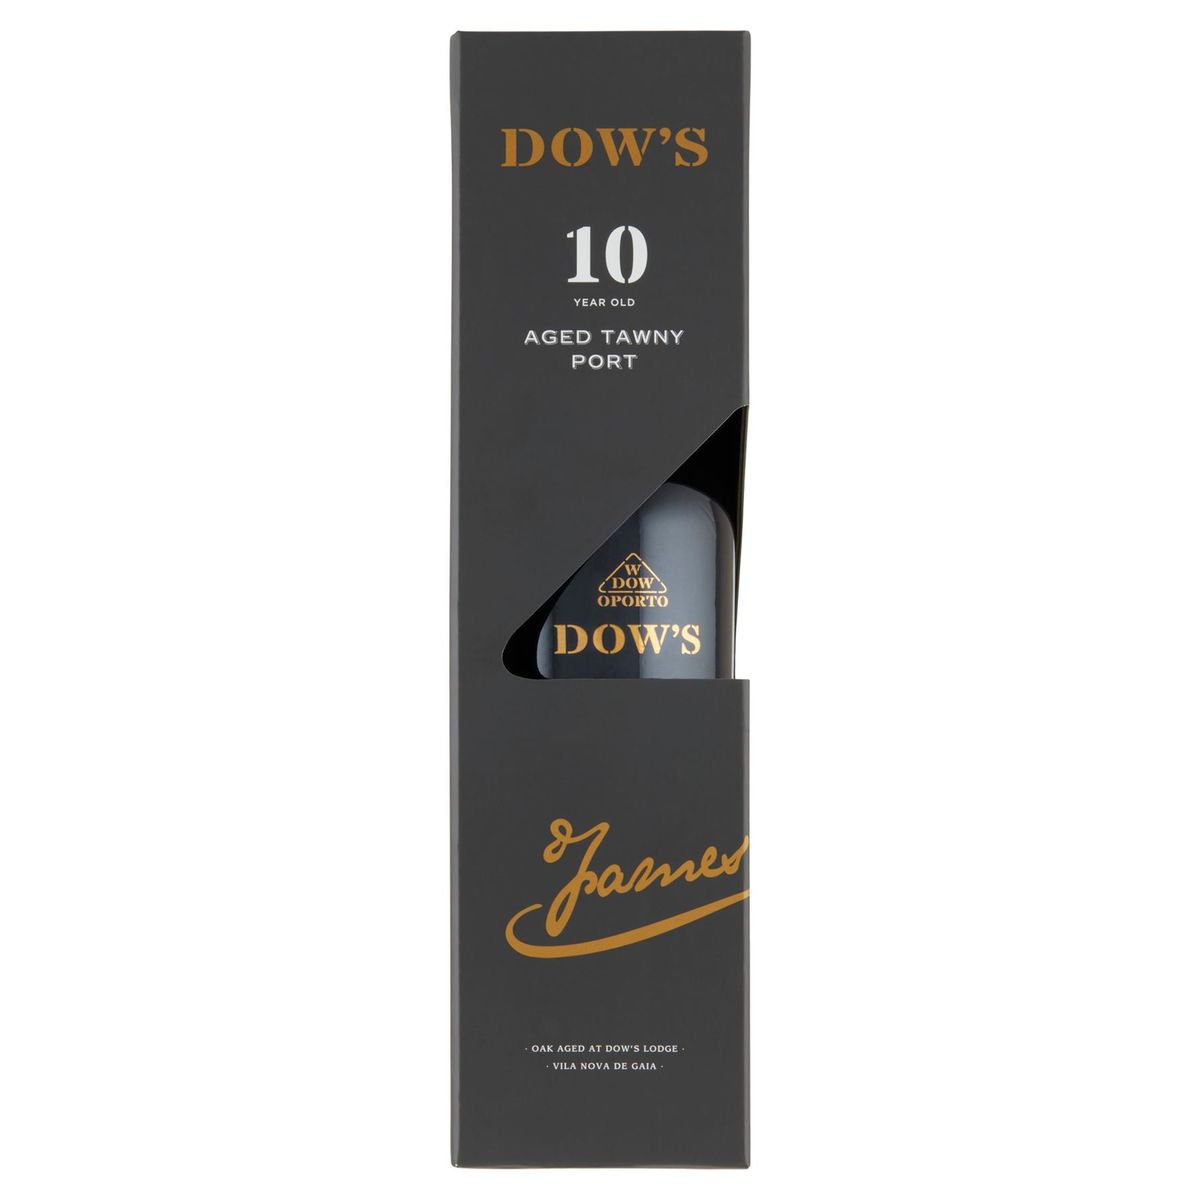 Dow's 10 Year Old Aged Tawny Port 75 cl